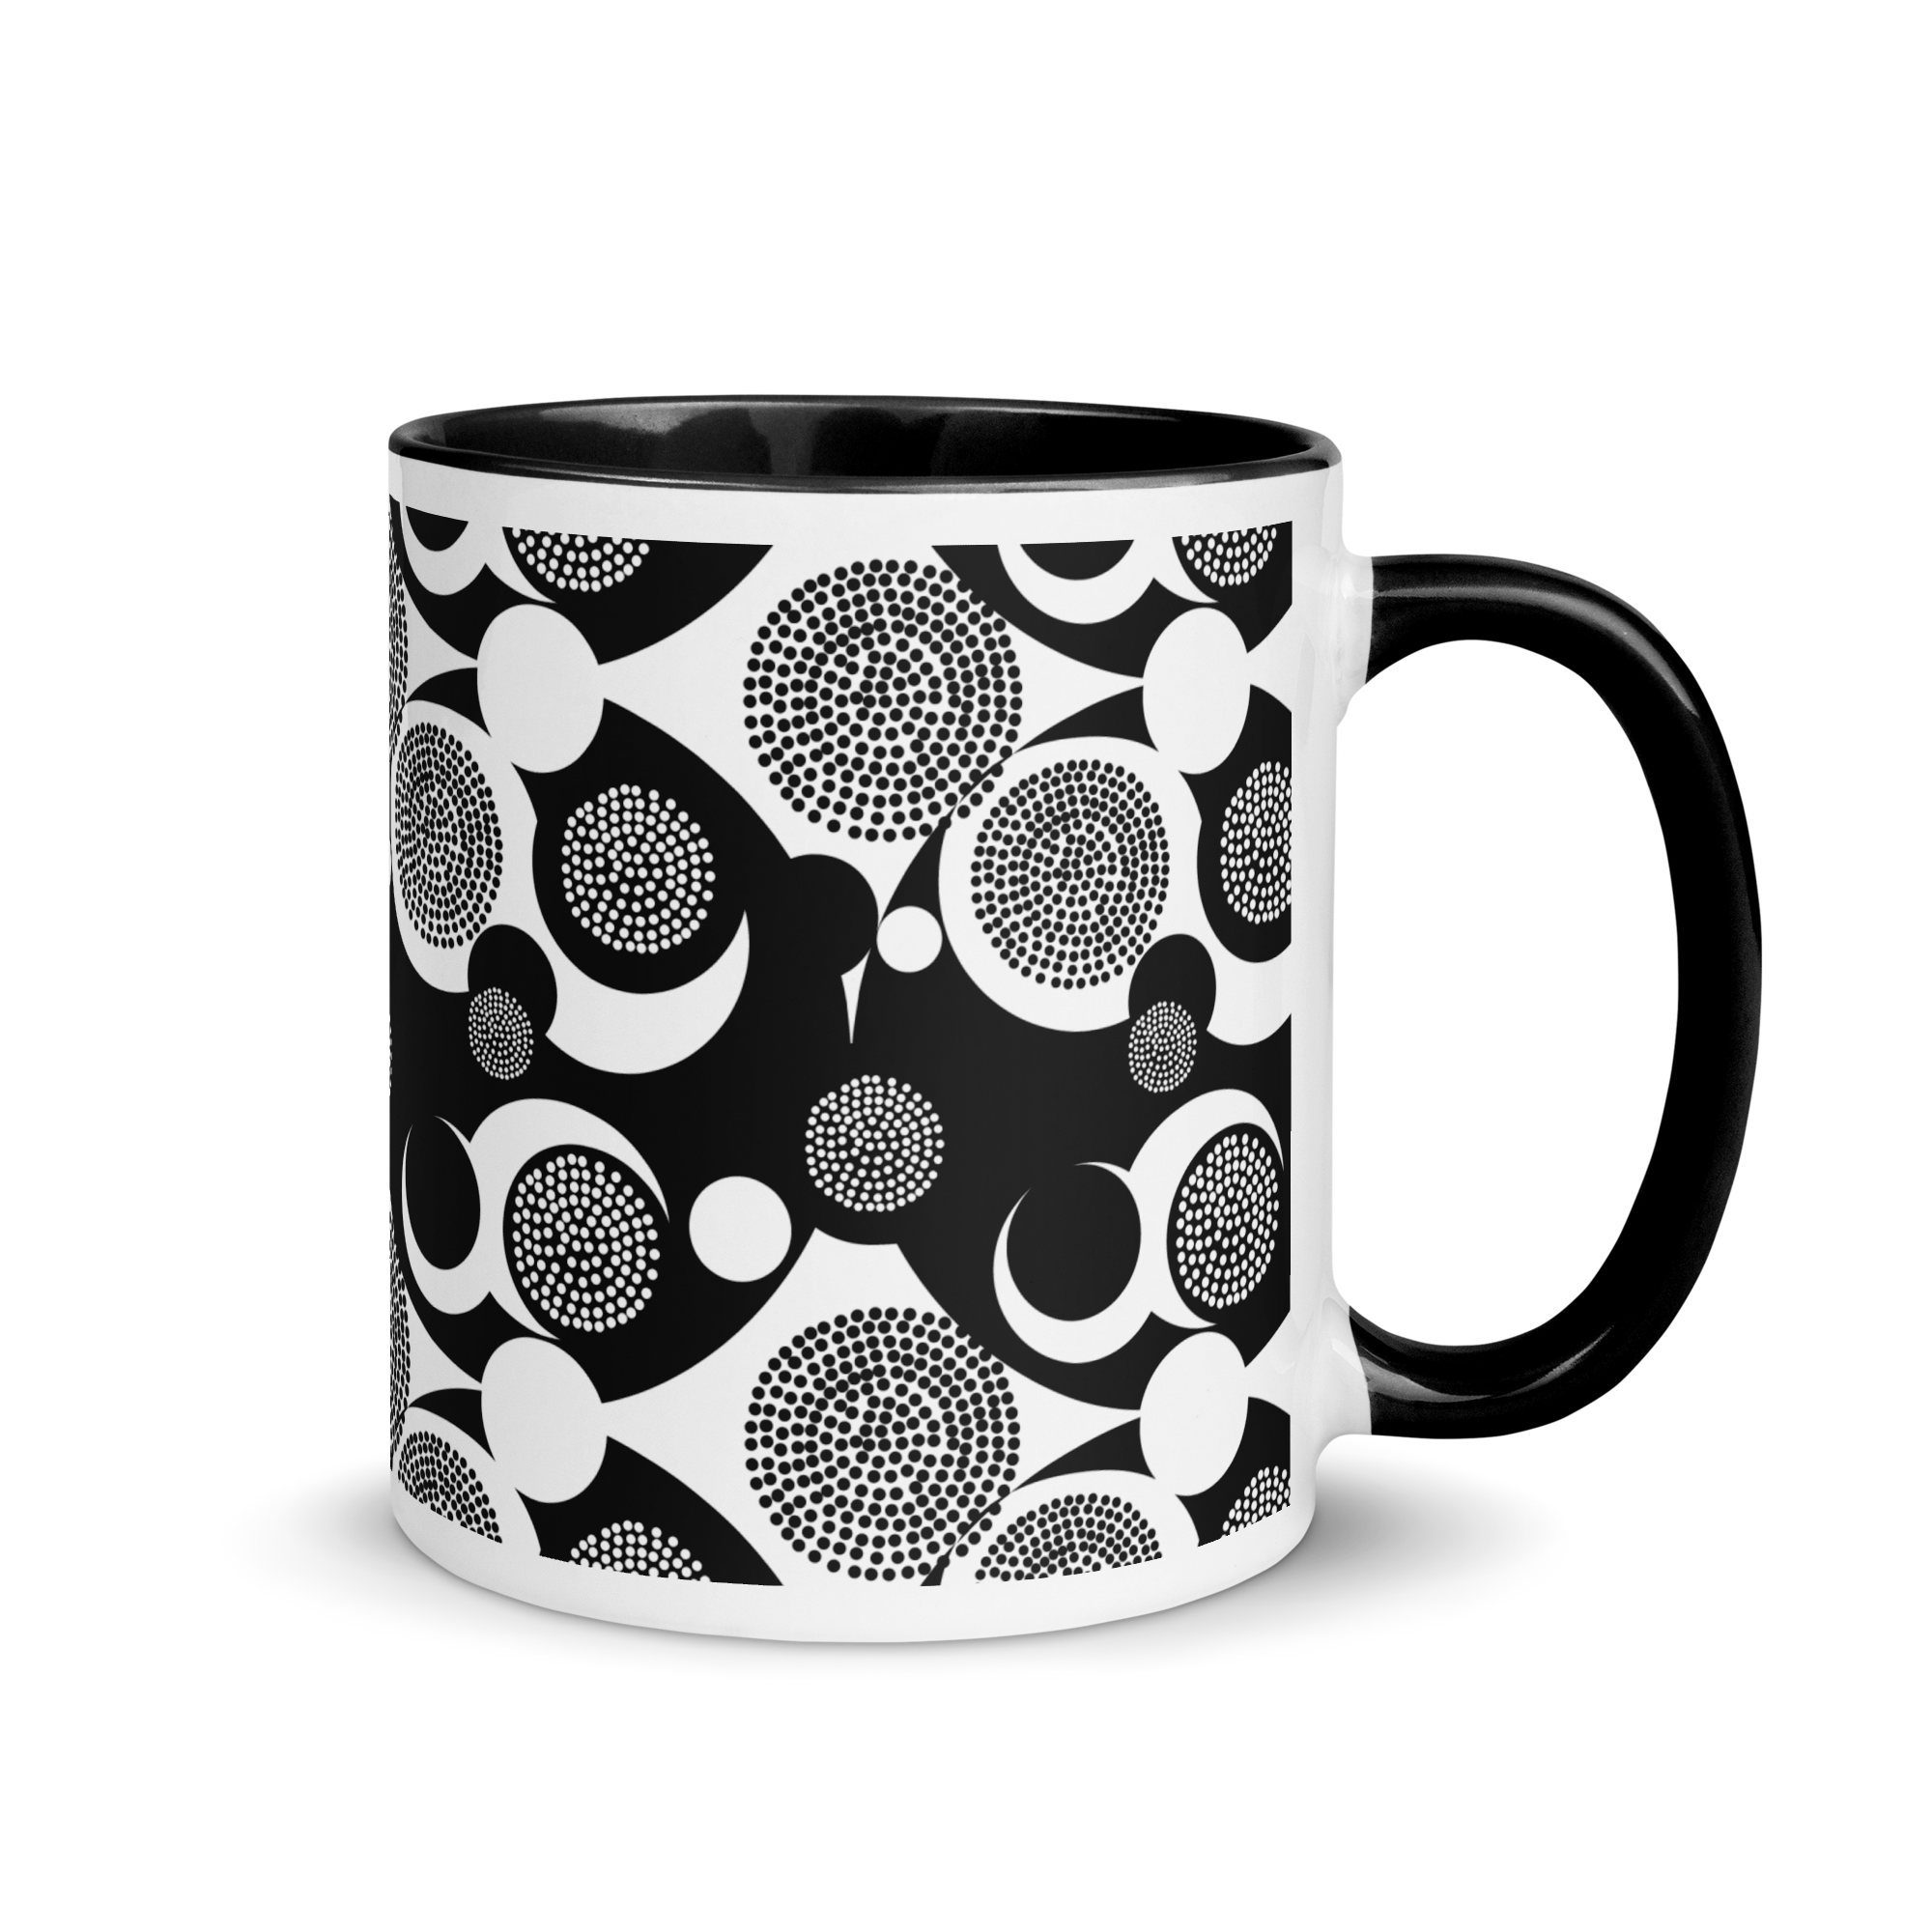 white-ceramic-mug-with-color-inside-black-11oz-right-6509be5a34c6f.png